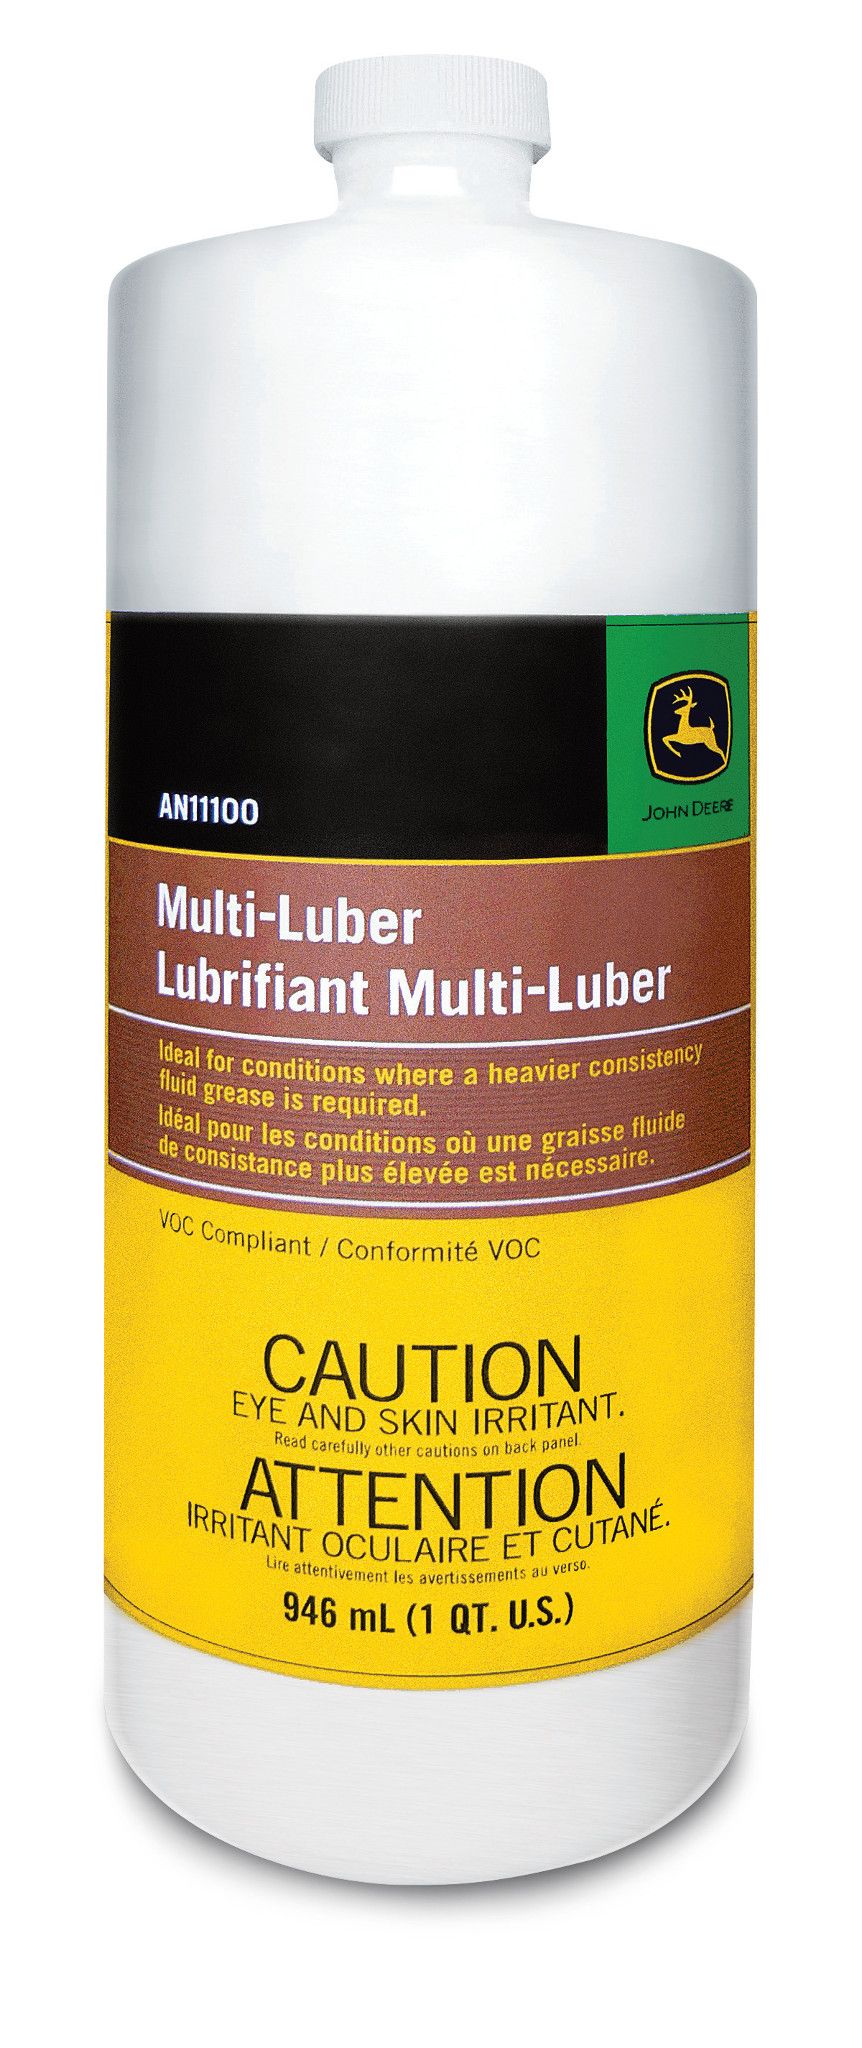 Multi-Luber Lubricant - AN11100